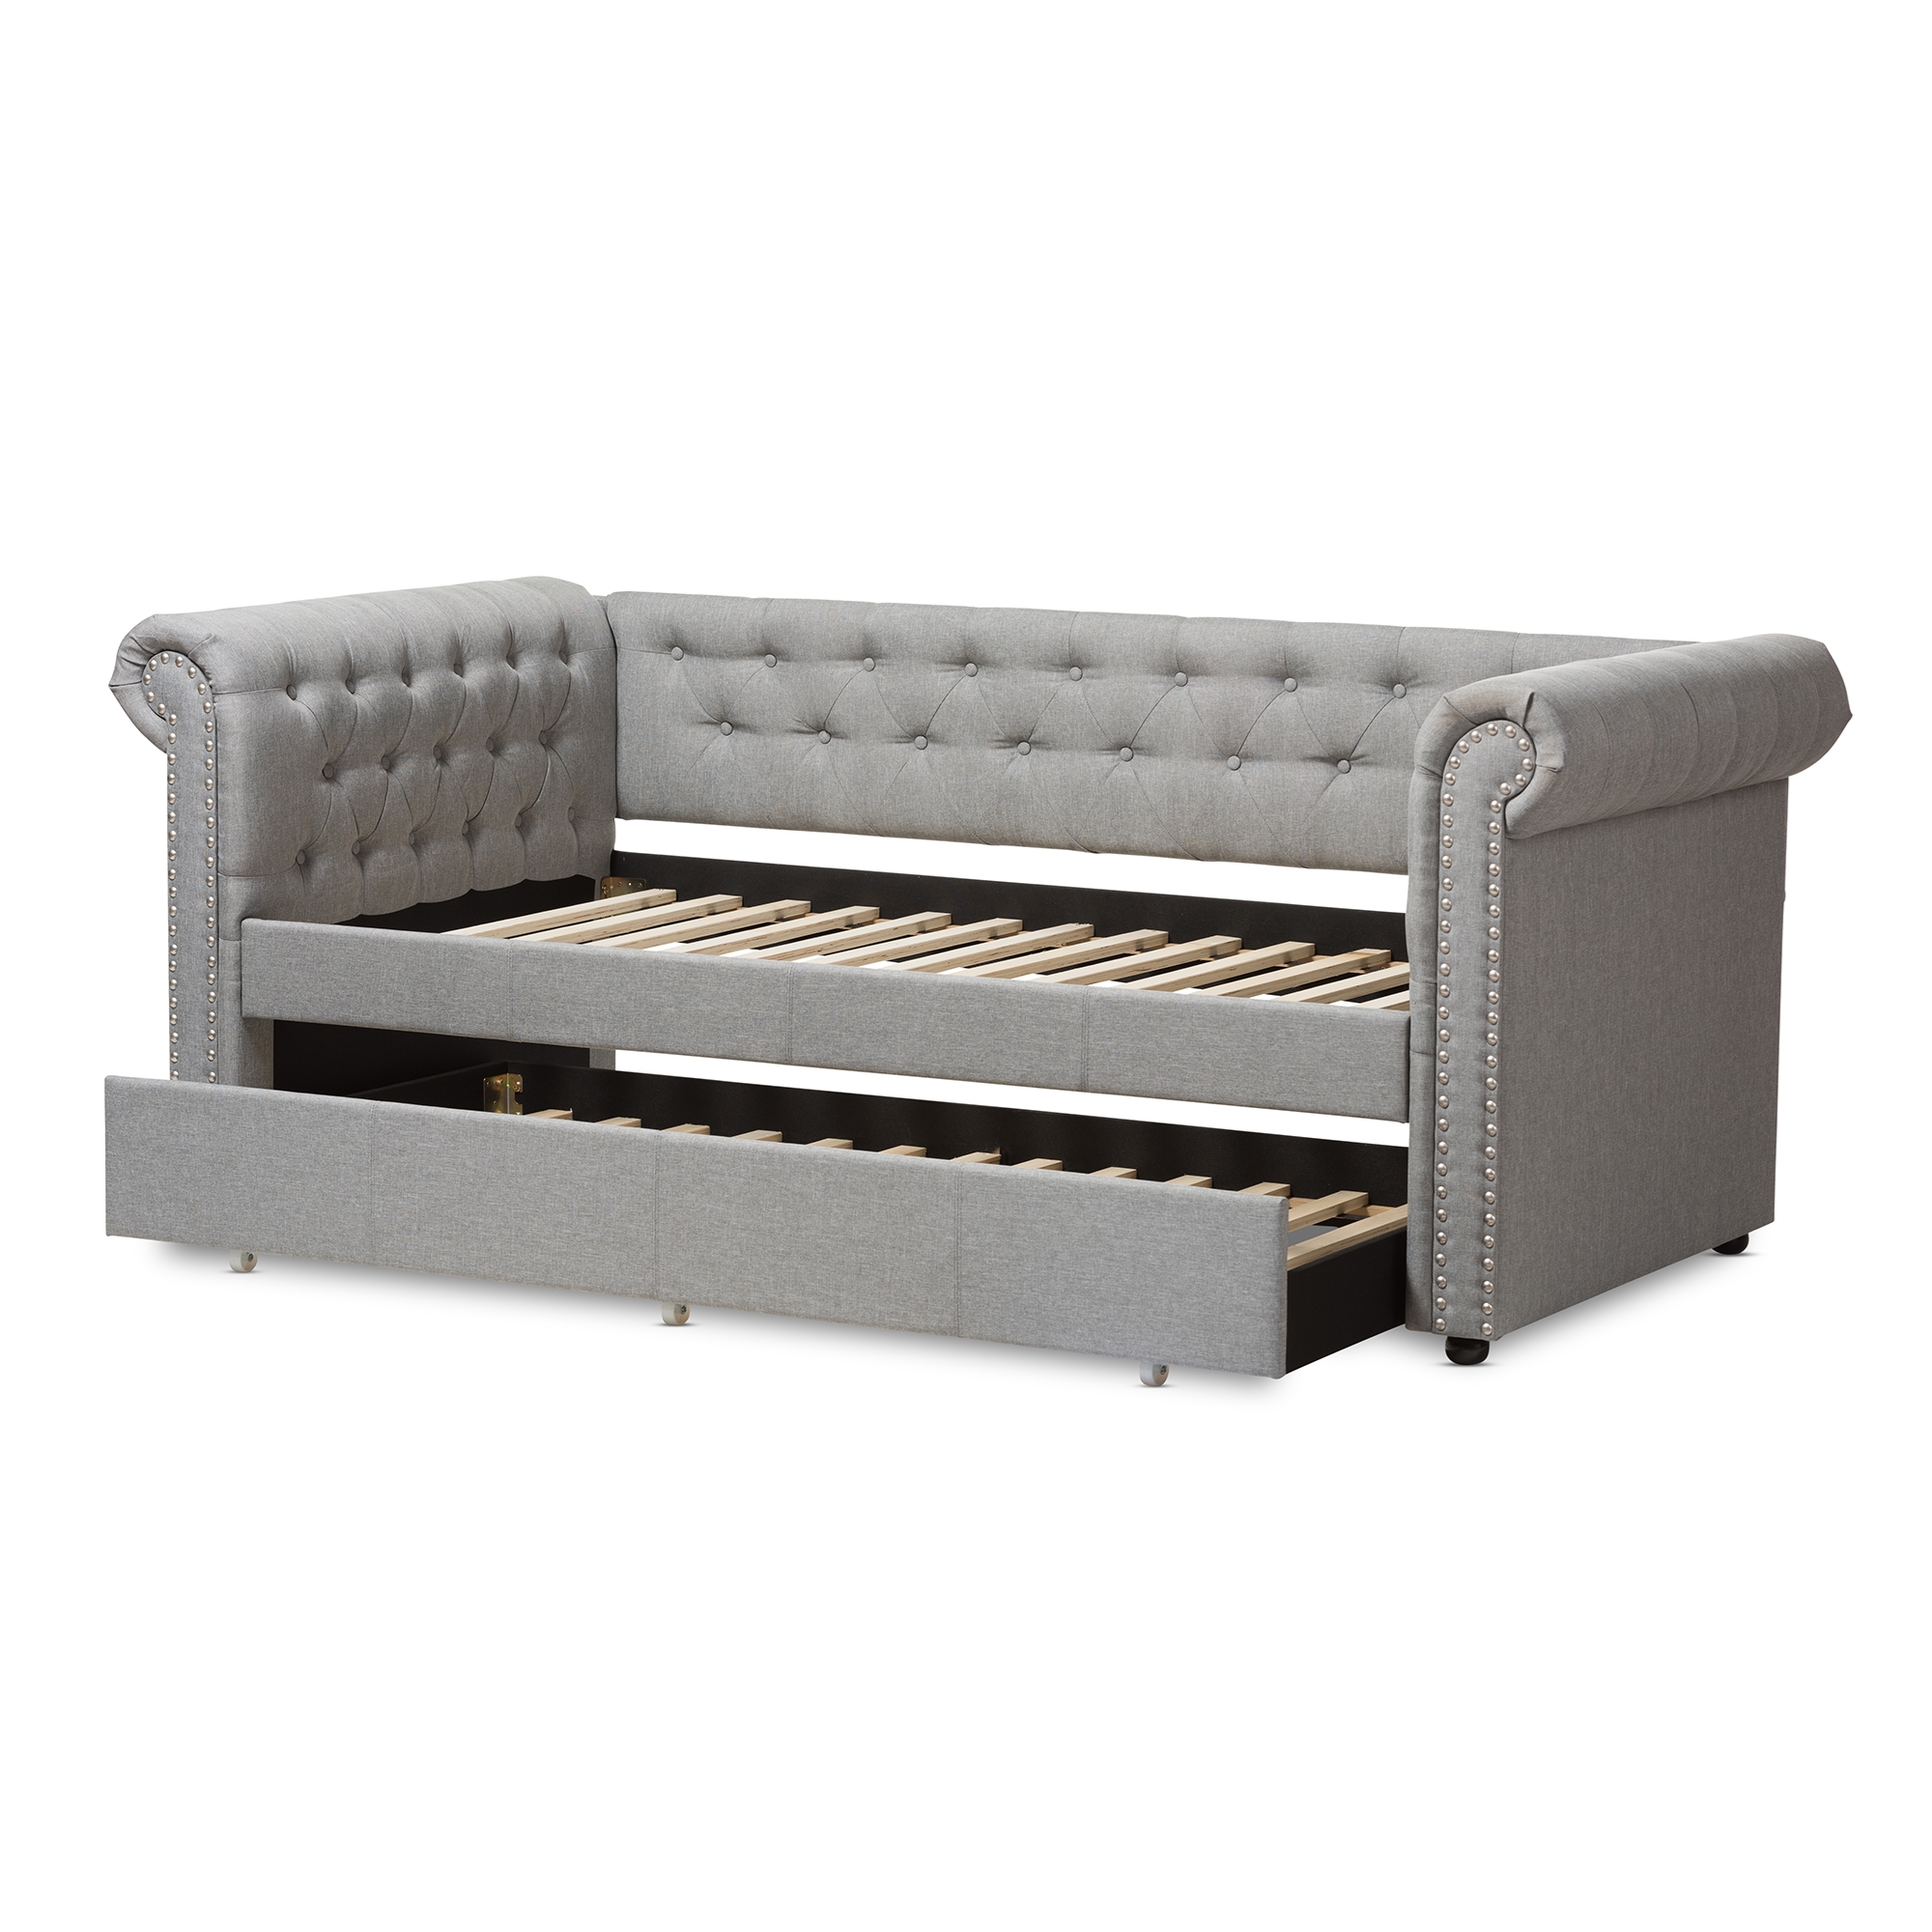 Mabelle Button-Tufted Gray Rolled Arms Sofa Daybed Bed Frame w/ Pull ...